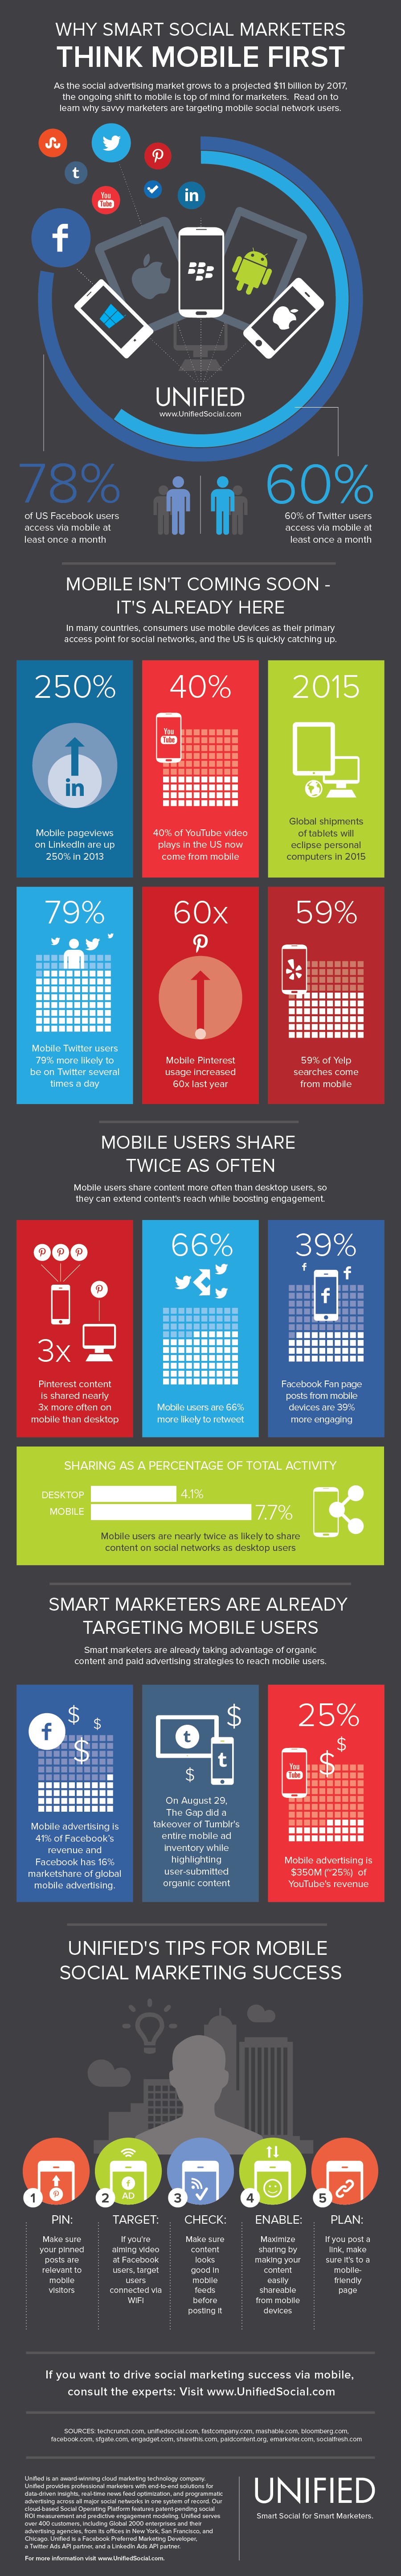 Why Smart Social Marketers Think Mobile First